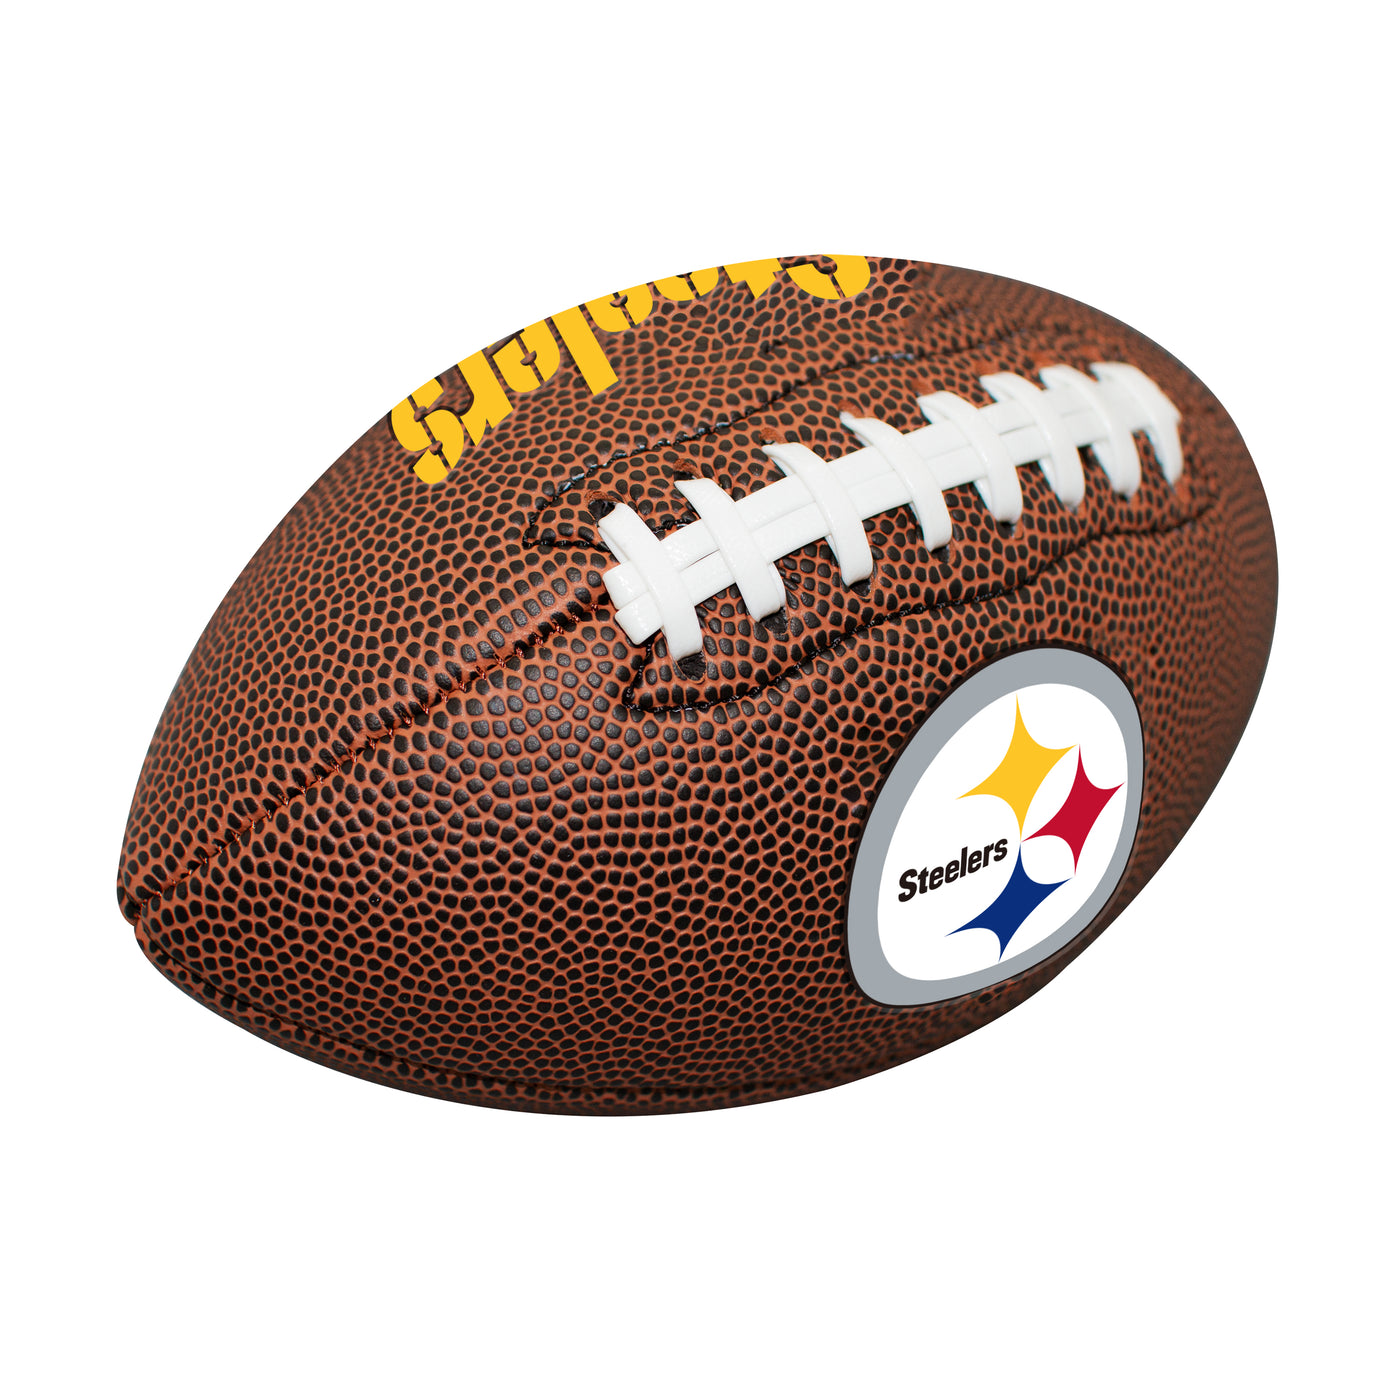 Pittsburgh Steelers Mini Size Composite Football